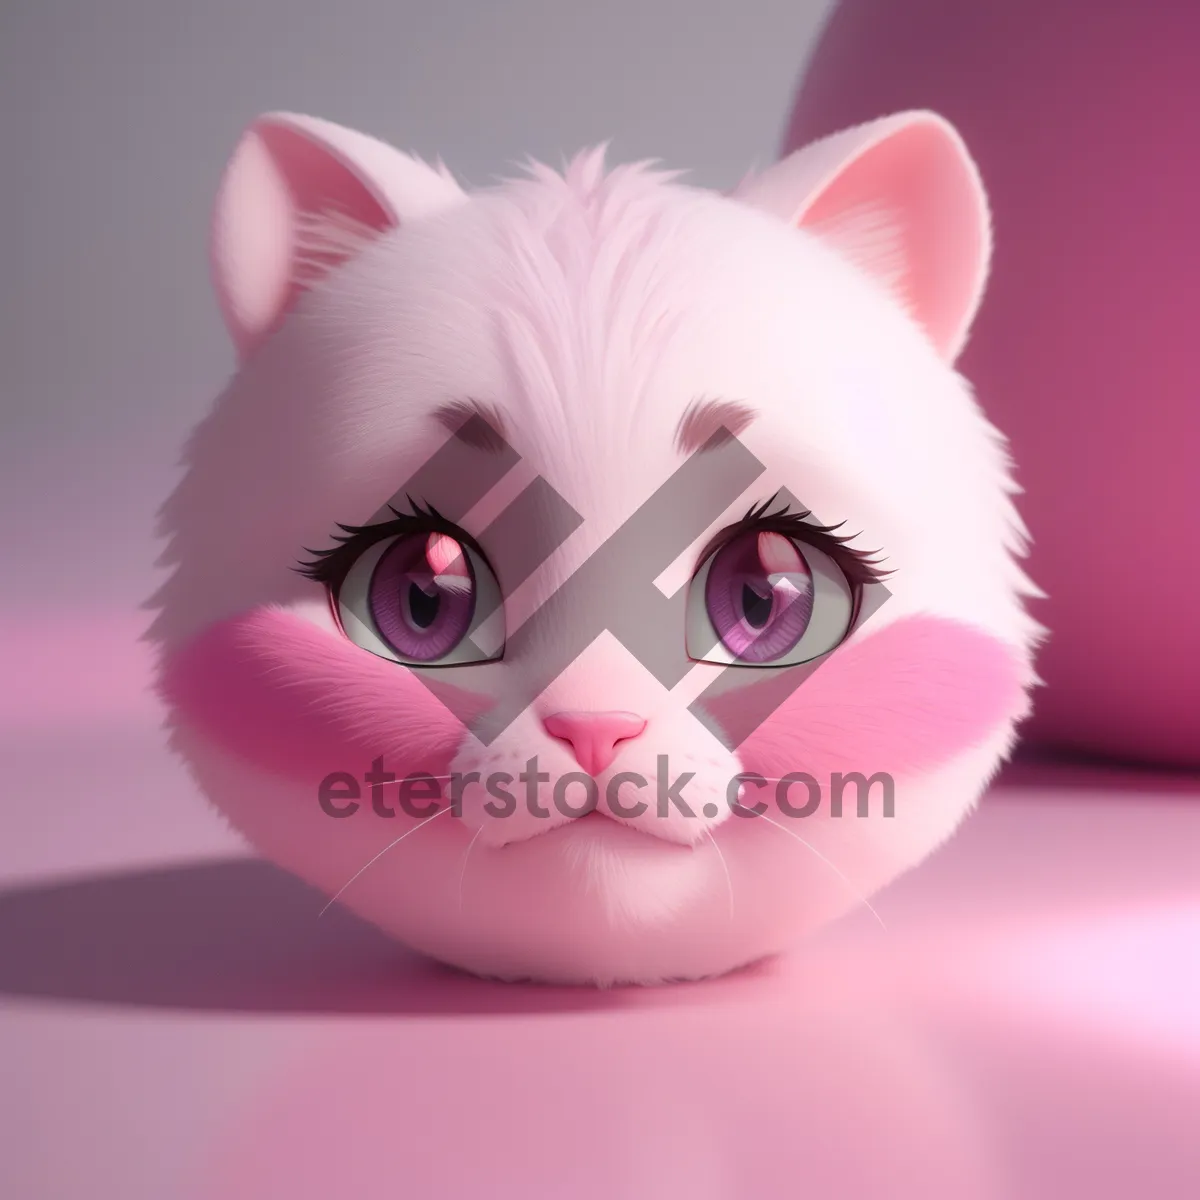 Picture of Adorable Animal Bank: Kitty, Piggy, Bunny, Pig